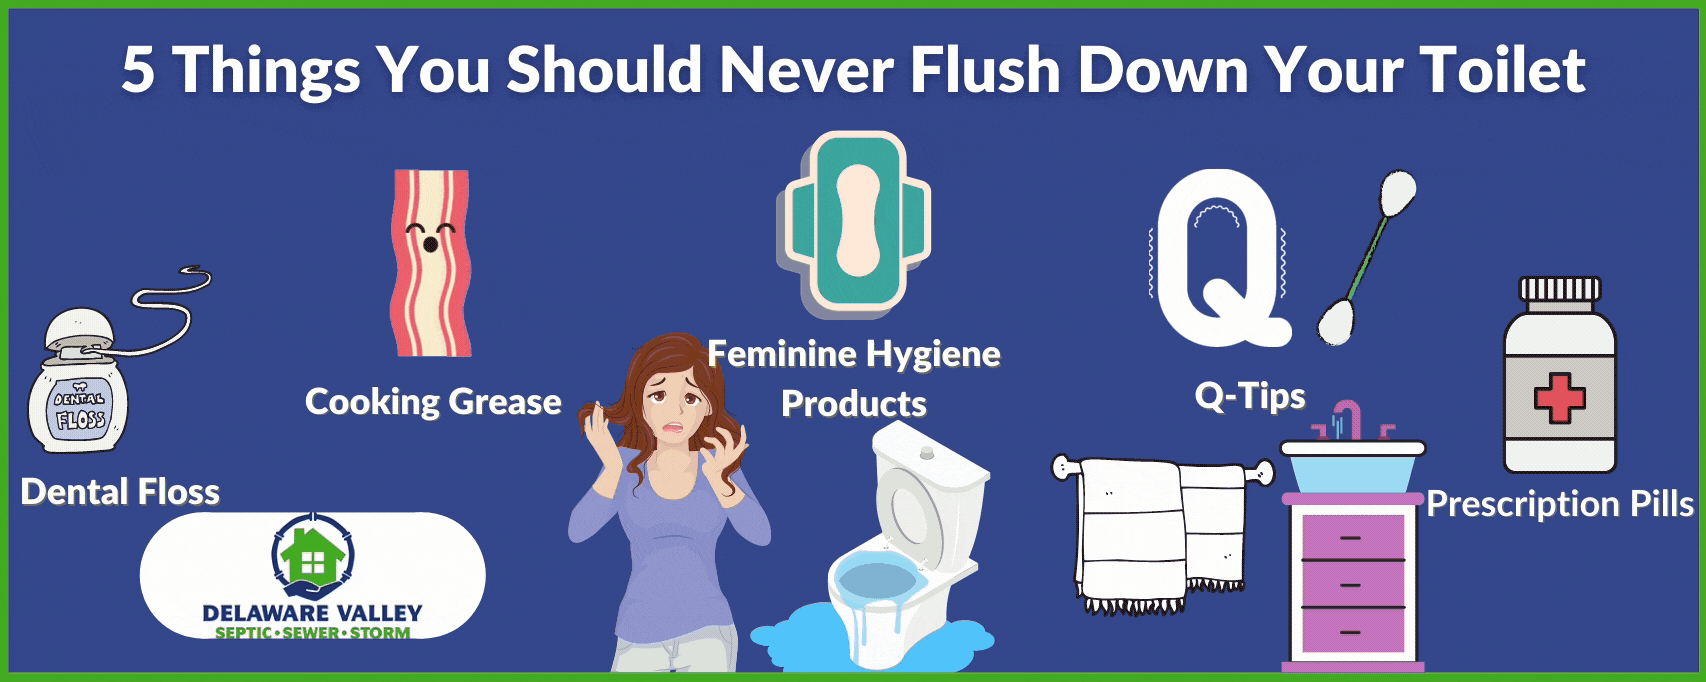 Why Can't You Flush Tampons Down The Toilet?